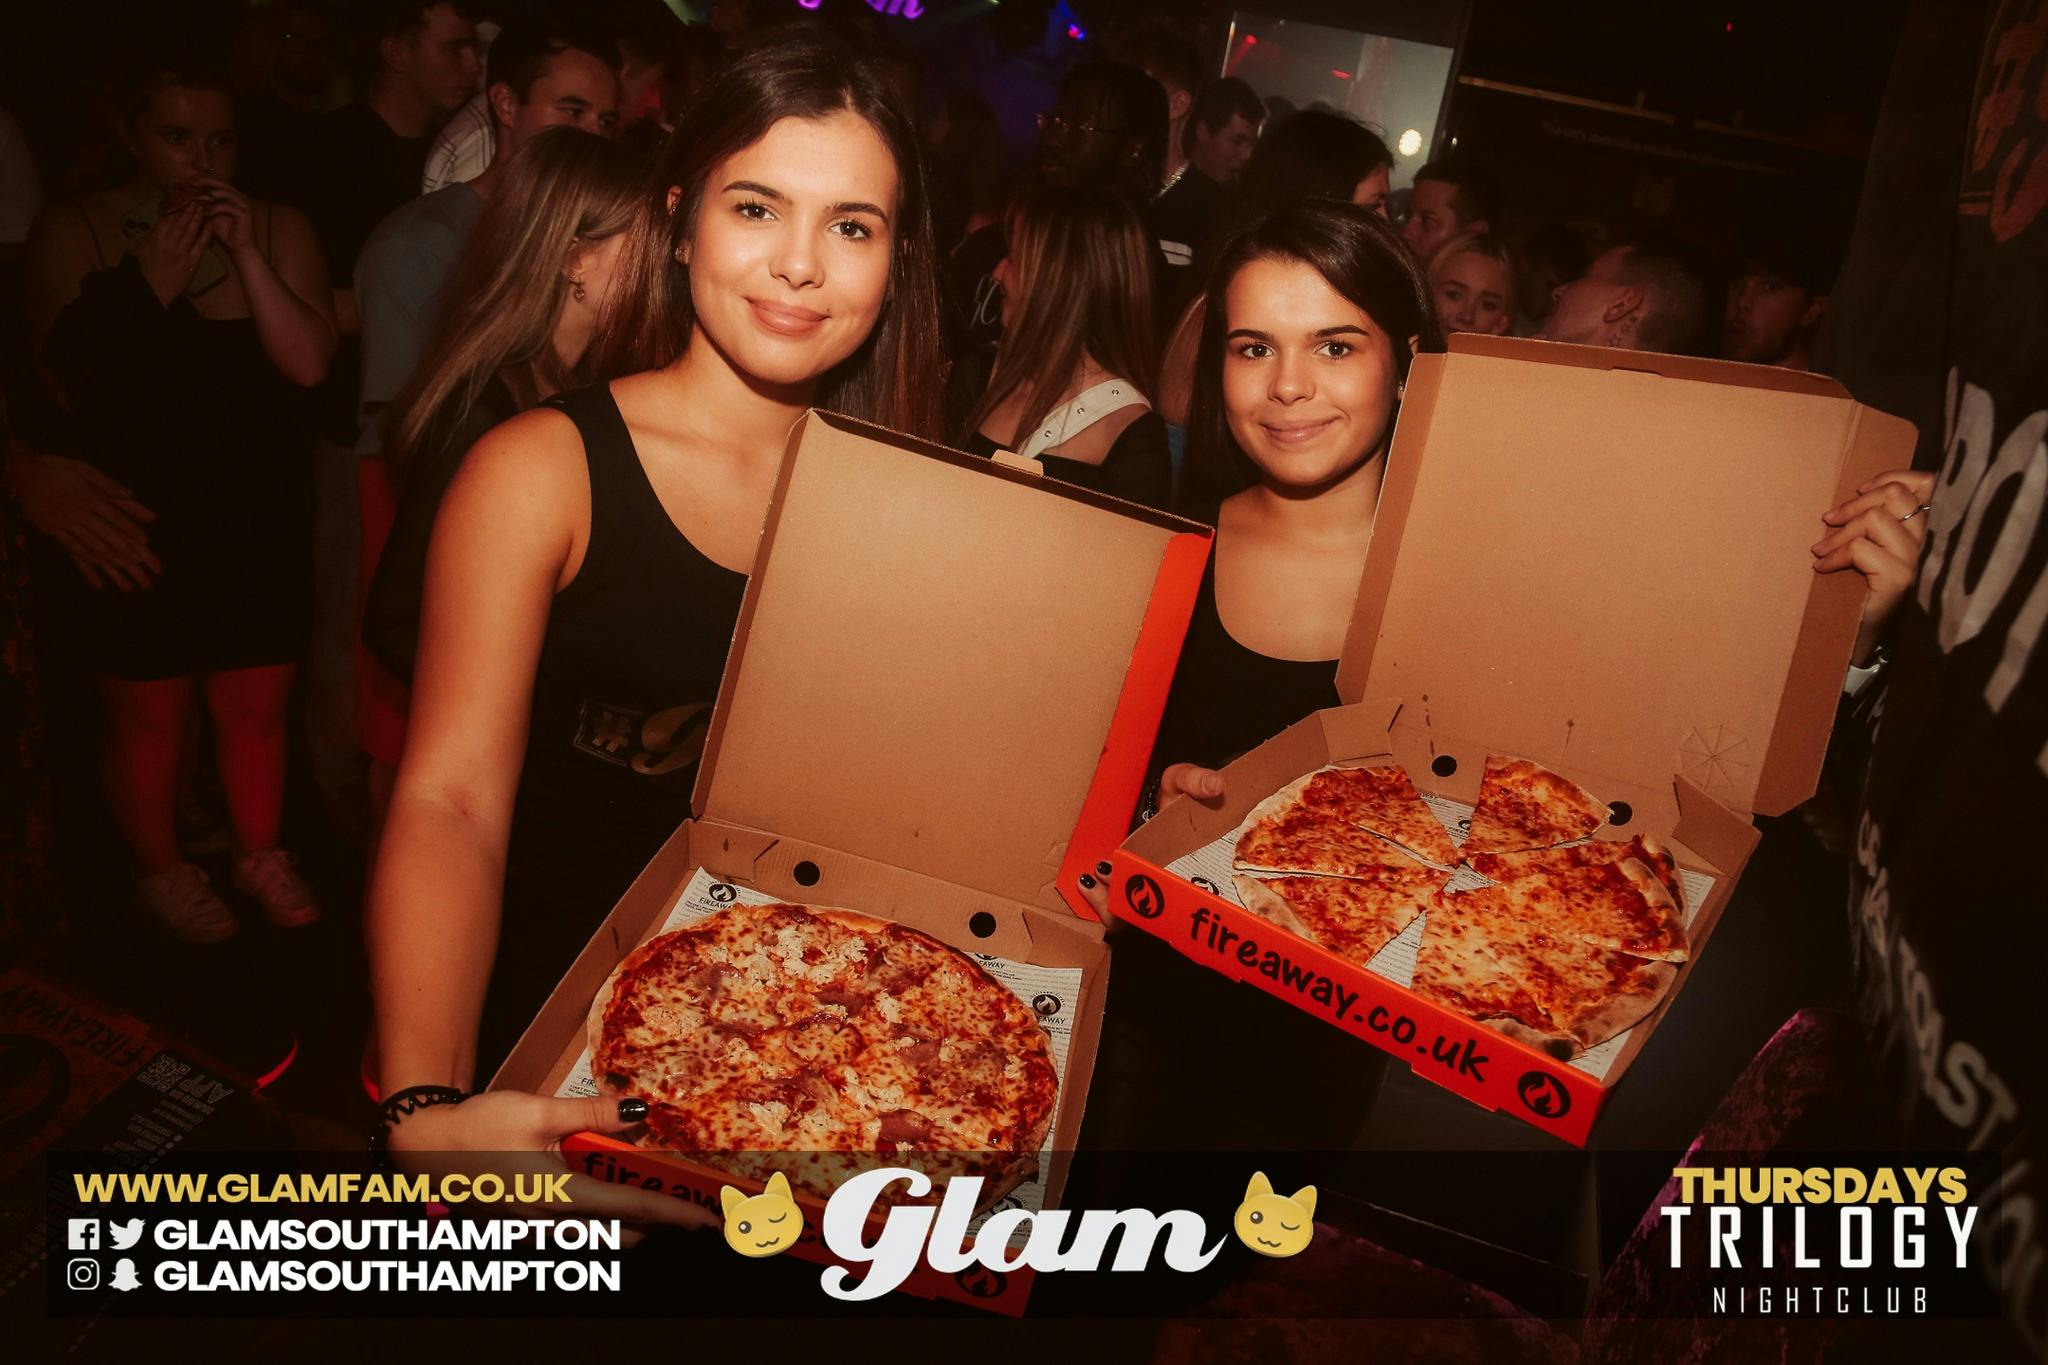 Glam Events – FREE FOOD!